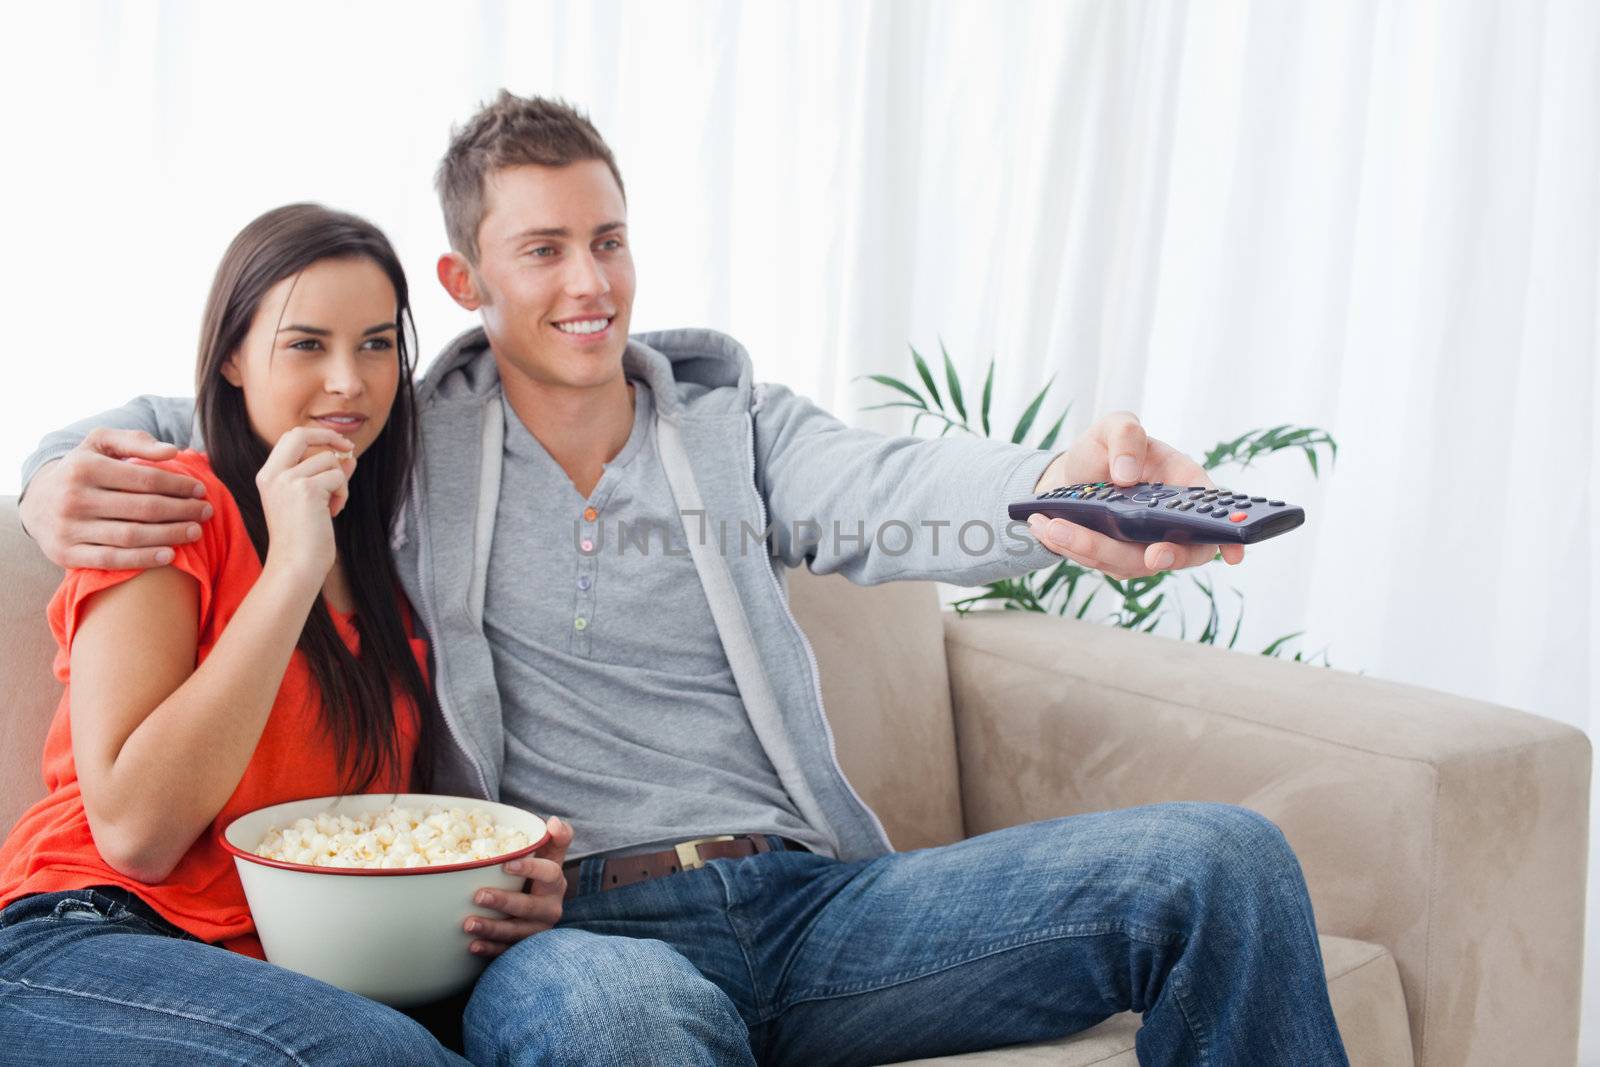 A side view shot of a smiling couple enjoying a tv show while having popcorn